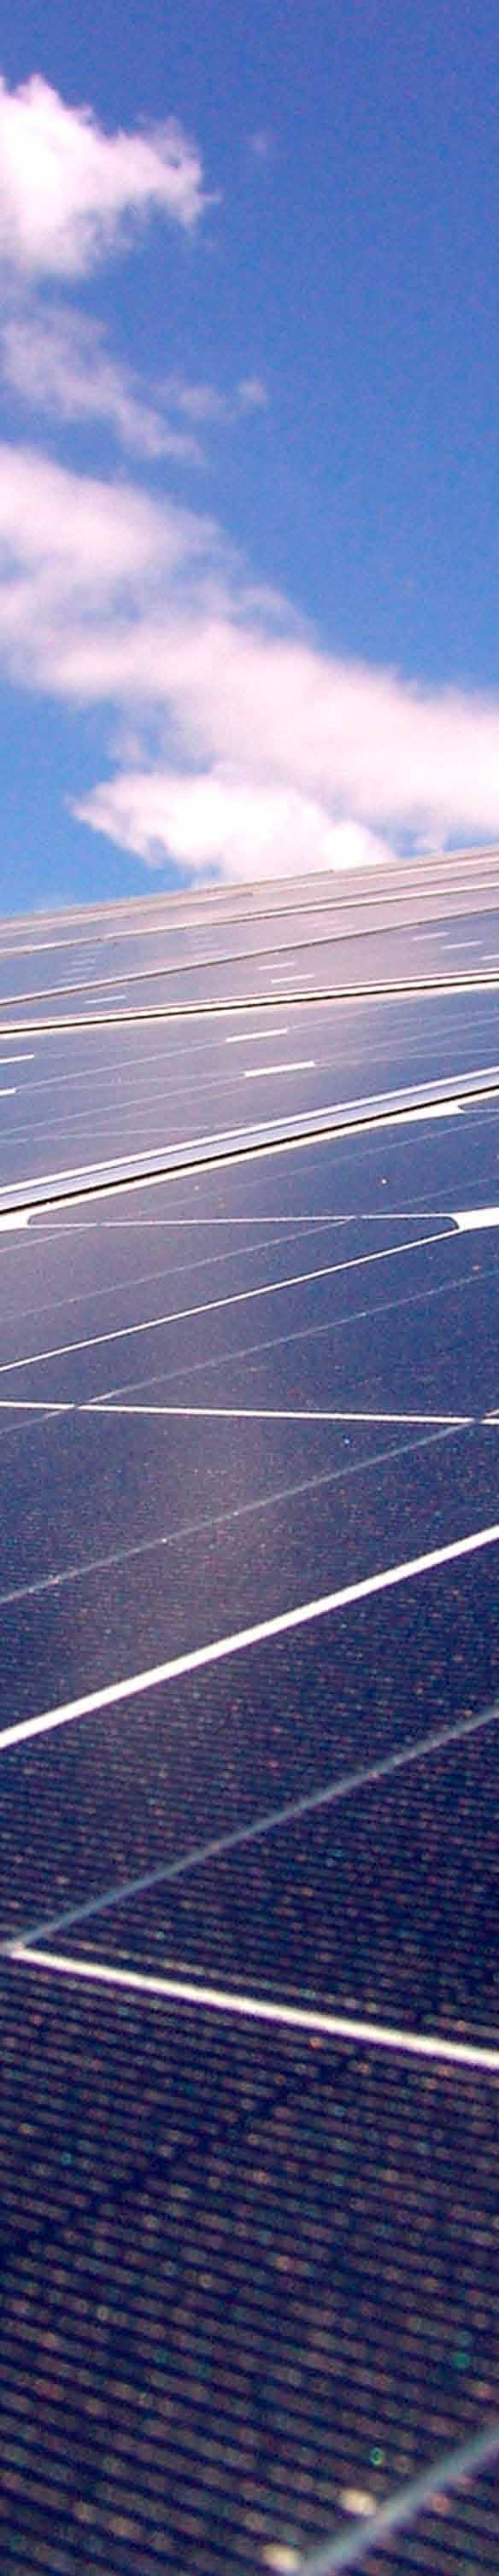 Standard-compliant components for commercial photovoltaic applications Safe and economical construction and operation of commercial photovoltaic systems In view of the limited resources of fossil